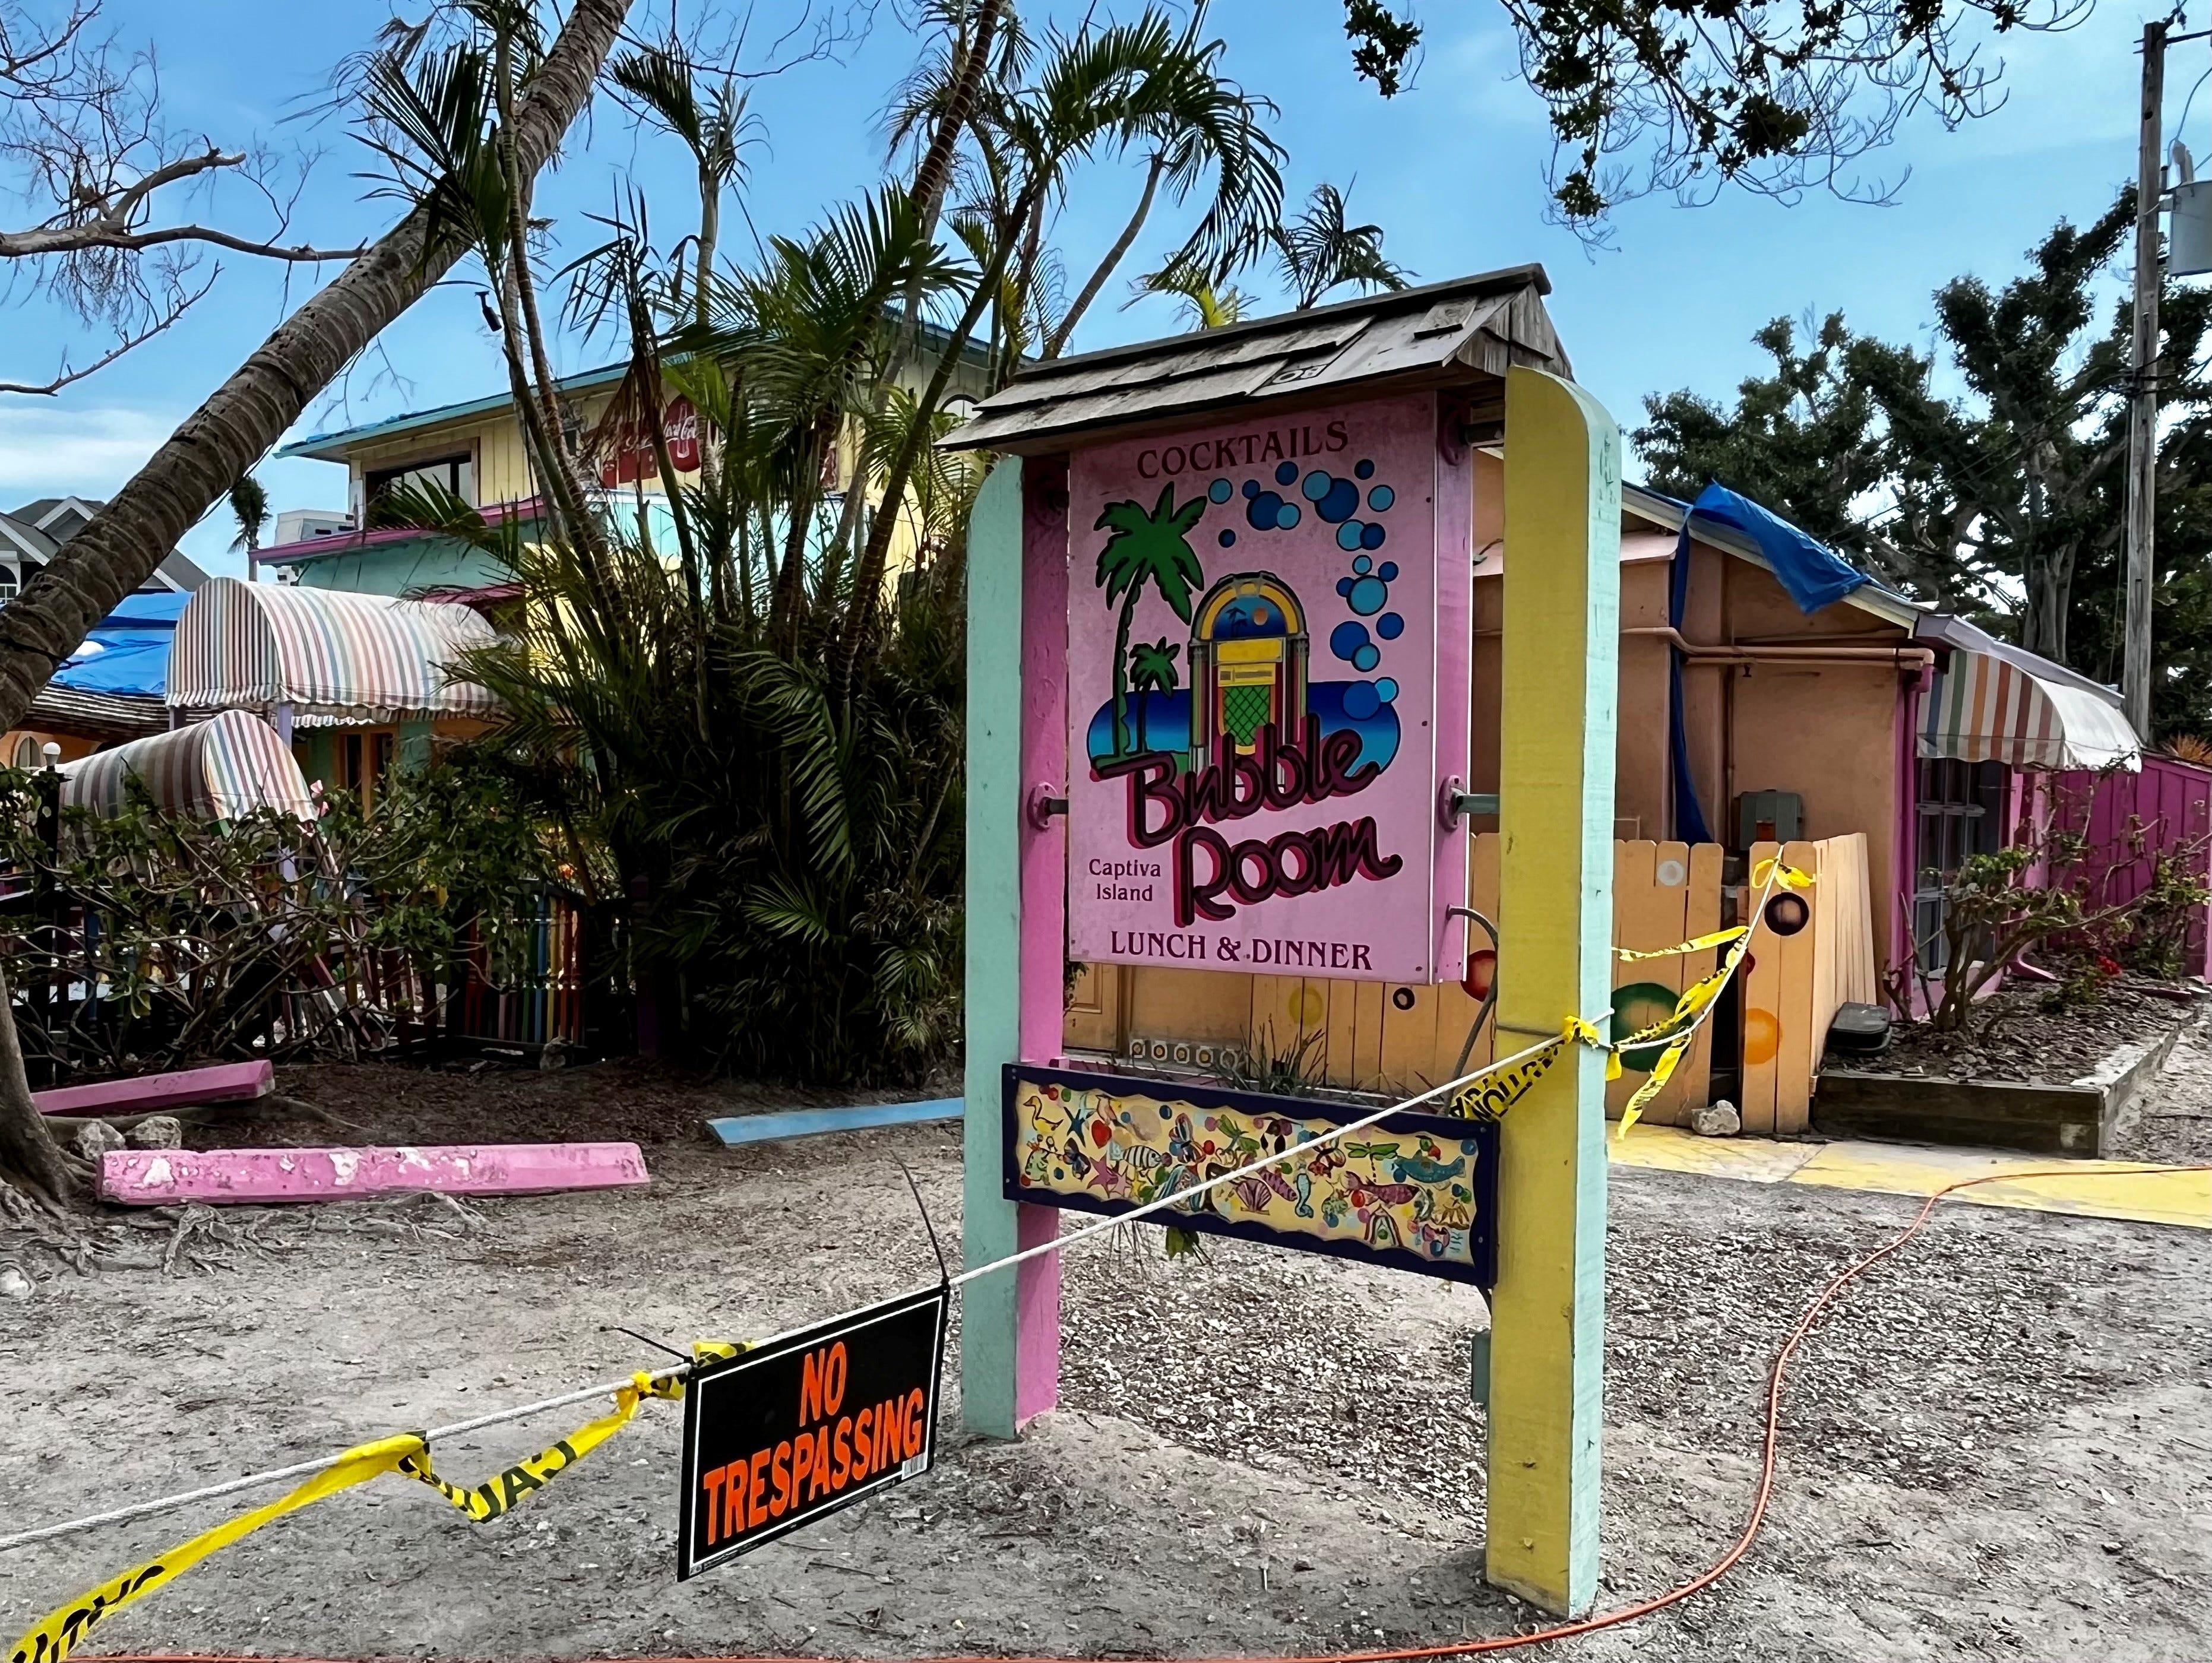 The Bubble Room remains closed from damage caused by Hurricane Ian. “That’s coming along slowly but surely,” General Manager Stephen Peach said back in March.